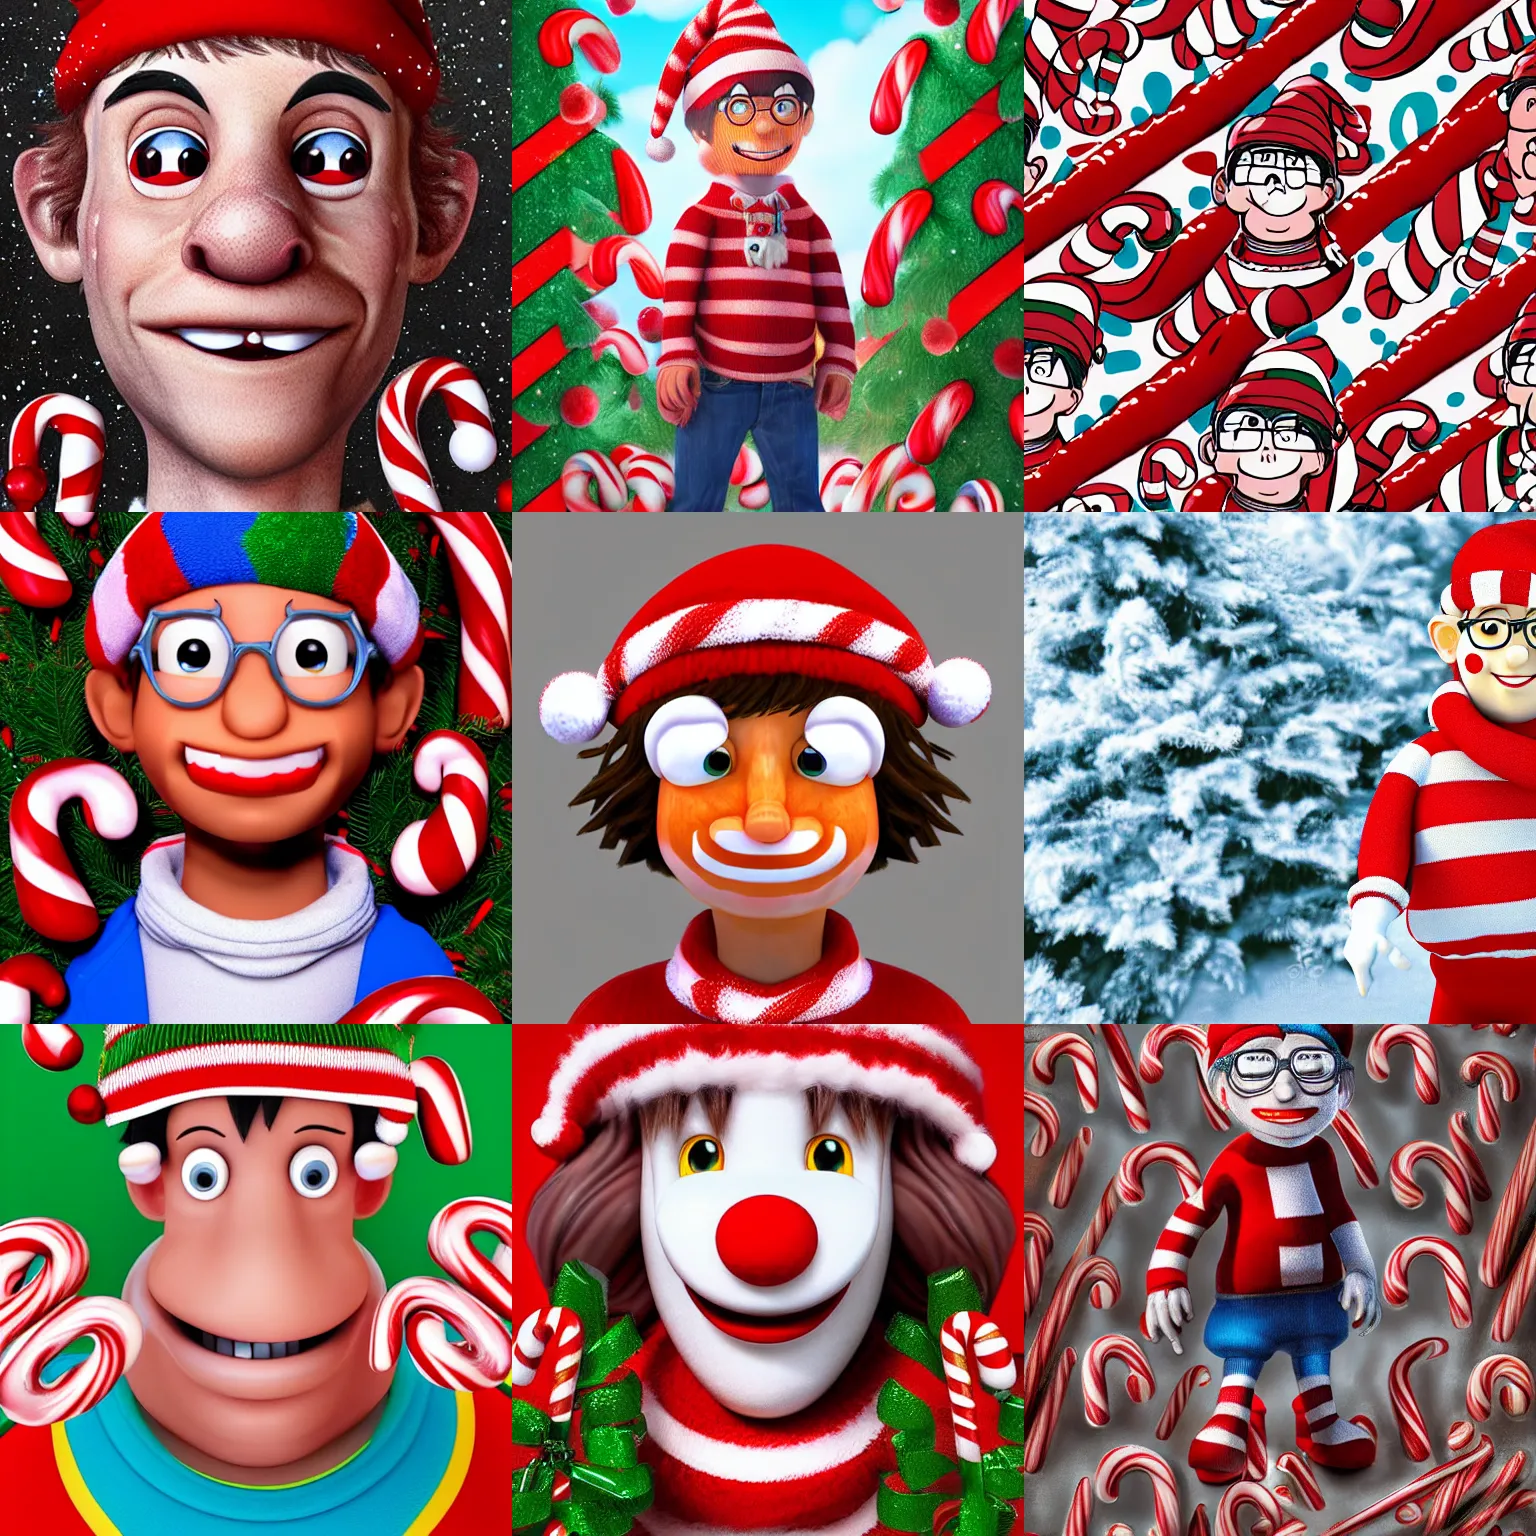 Prompt: portrait of Waldo character from Where's Waldo, hidding by candy canes, max accurate advanced digital art, HD, 8k